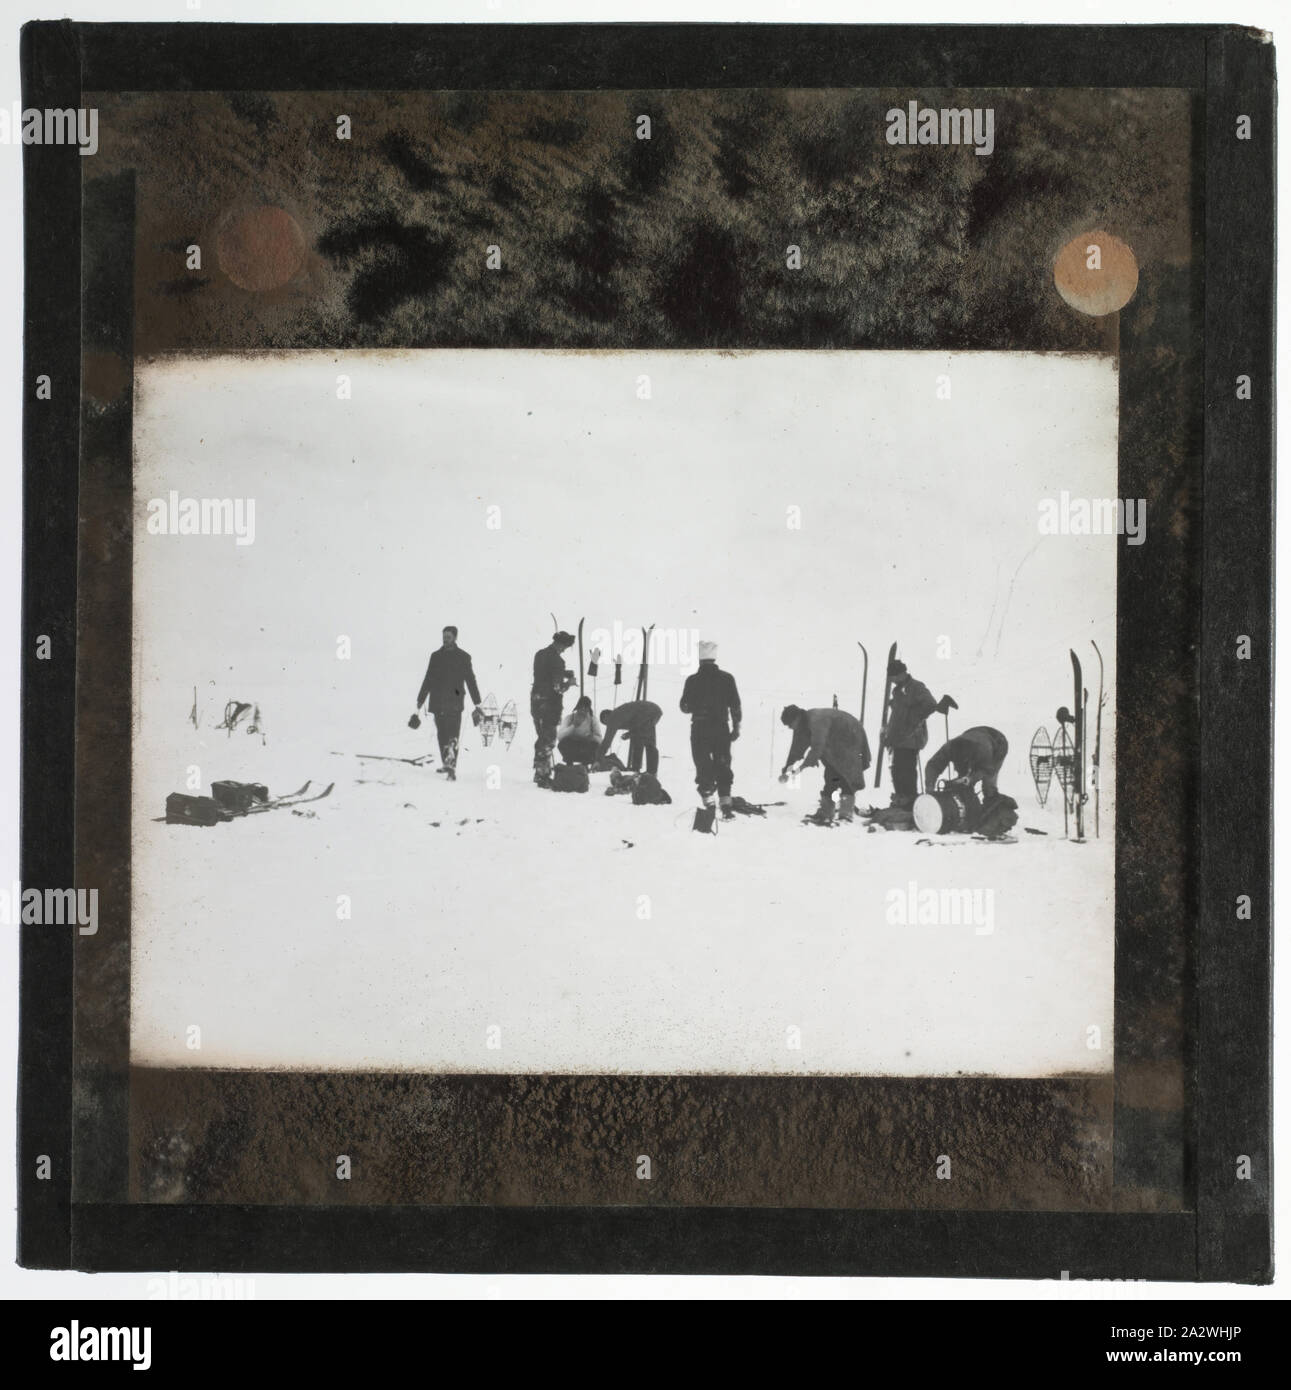 Lantern Slide - Discovery II Search Party at 'Little America', Ellsworth Relief Expedition, Antarctica, 1935-1936, Lantern slide of the Discovery II search party during the Ellsworth Relief Expedition, Antarctica. One of 328 images in various formats including artworks, photographs, glass negatives and lantern slides Stock Photo